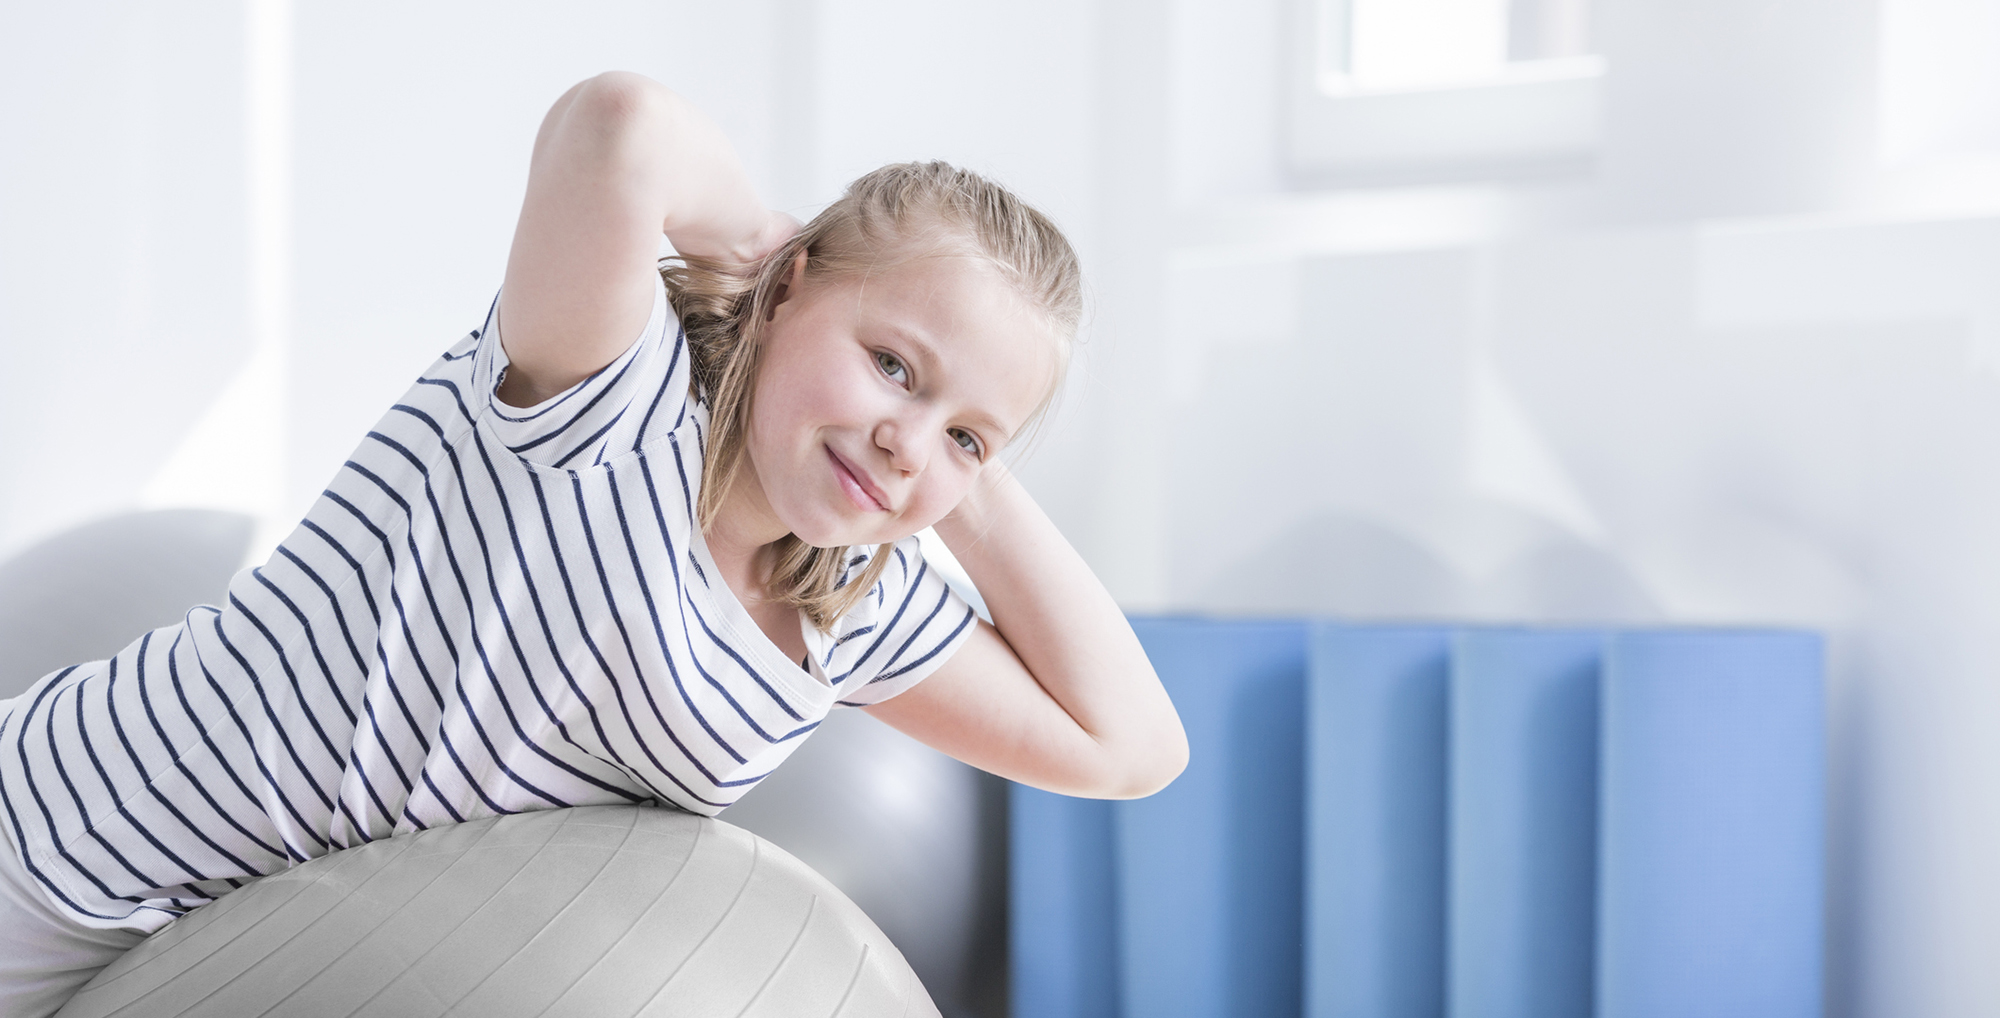 Child smiling at camera laying on ball during physical therapy session